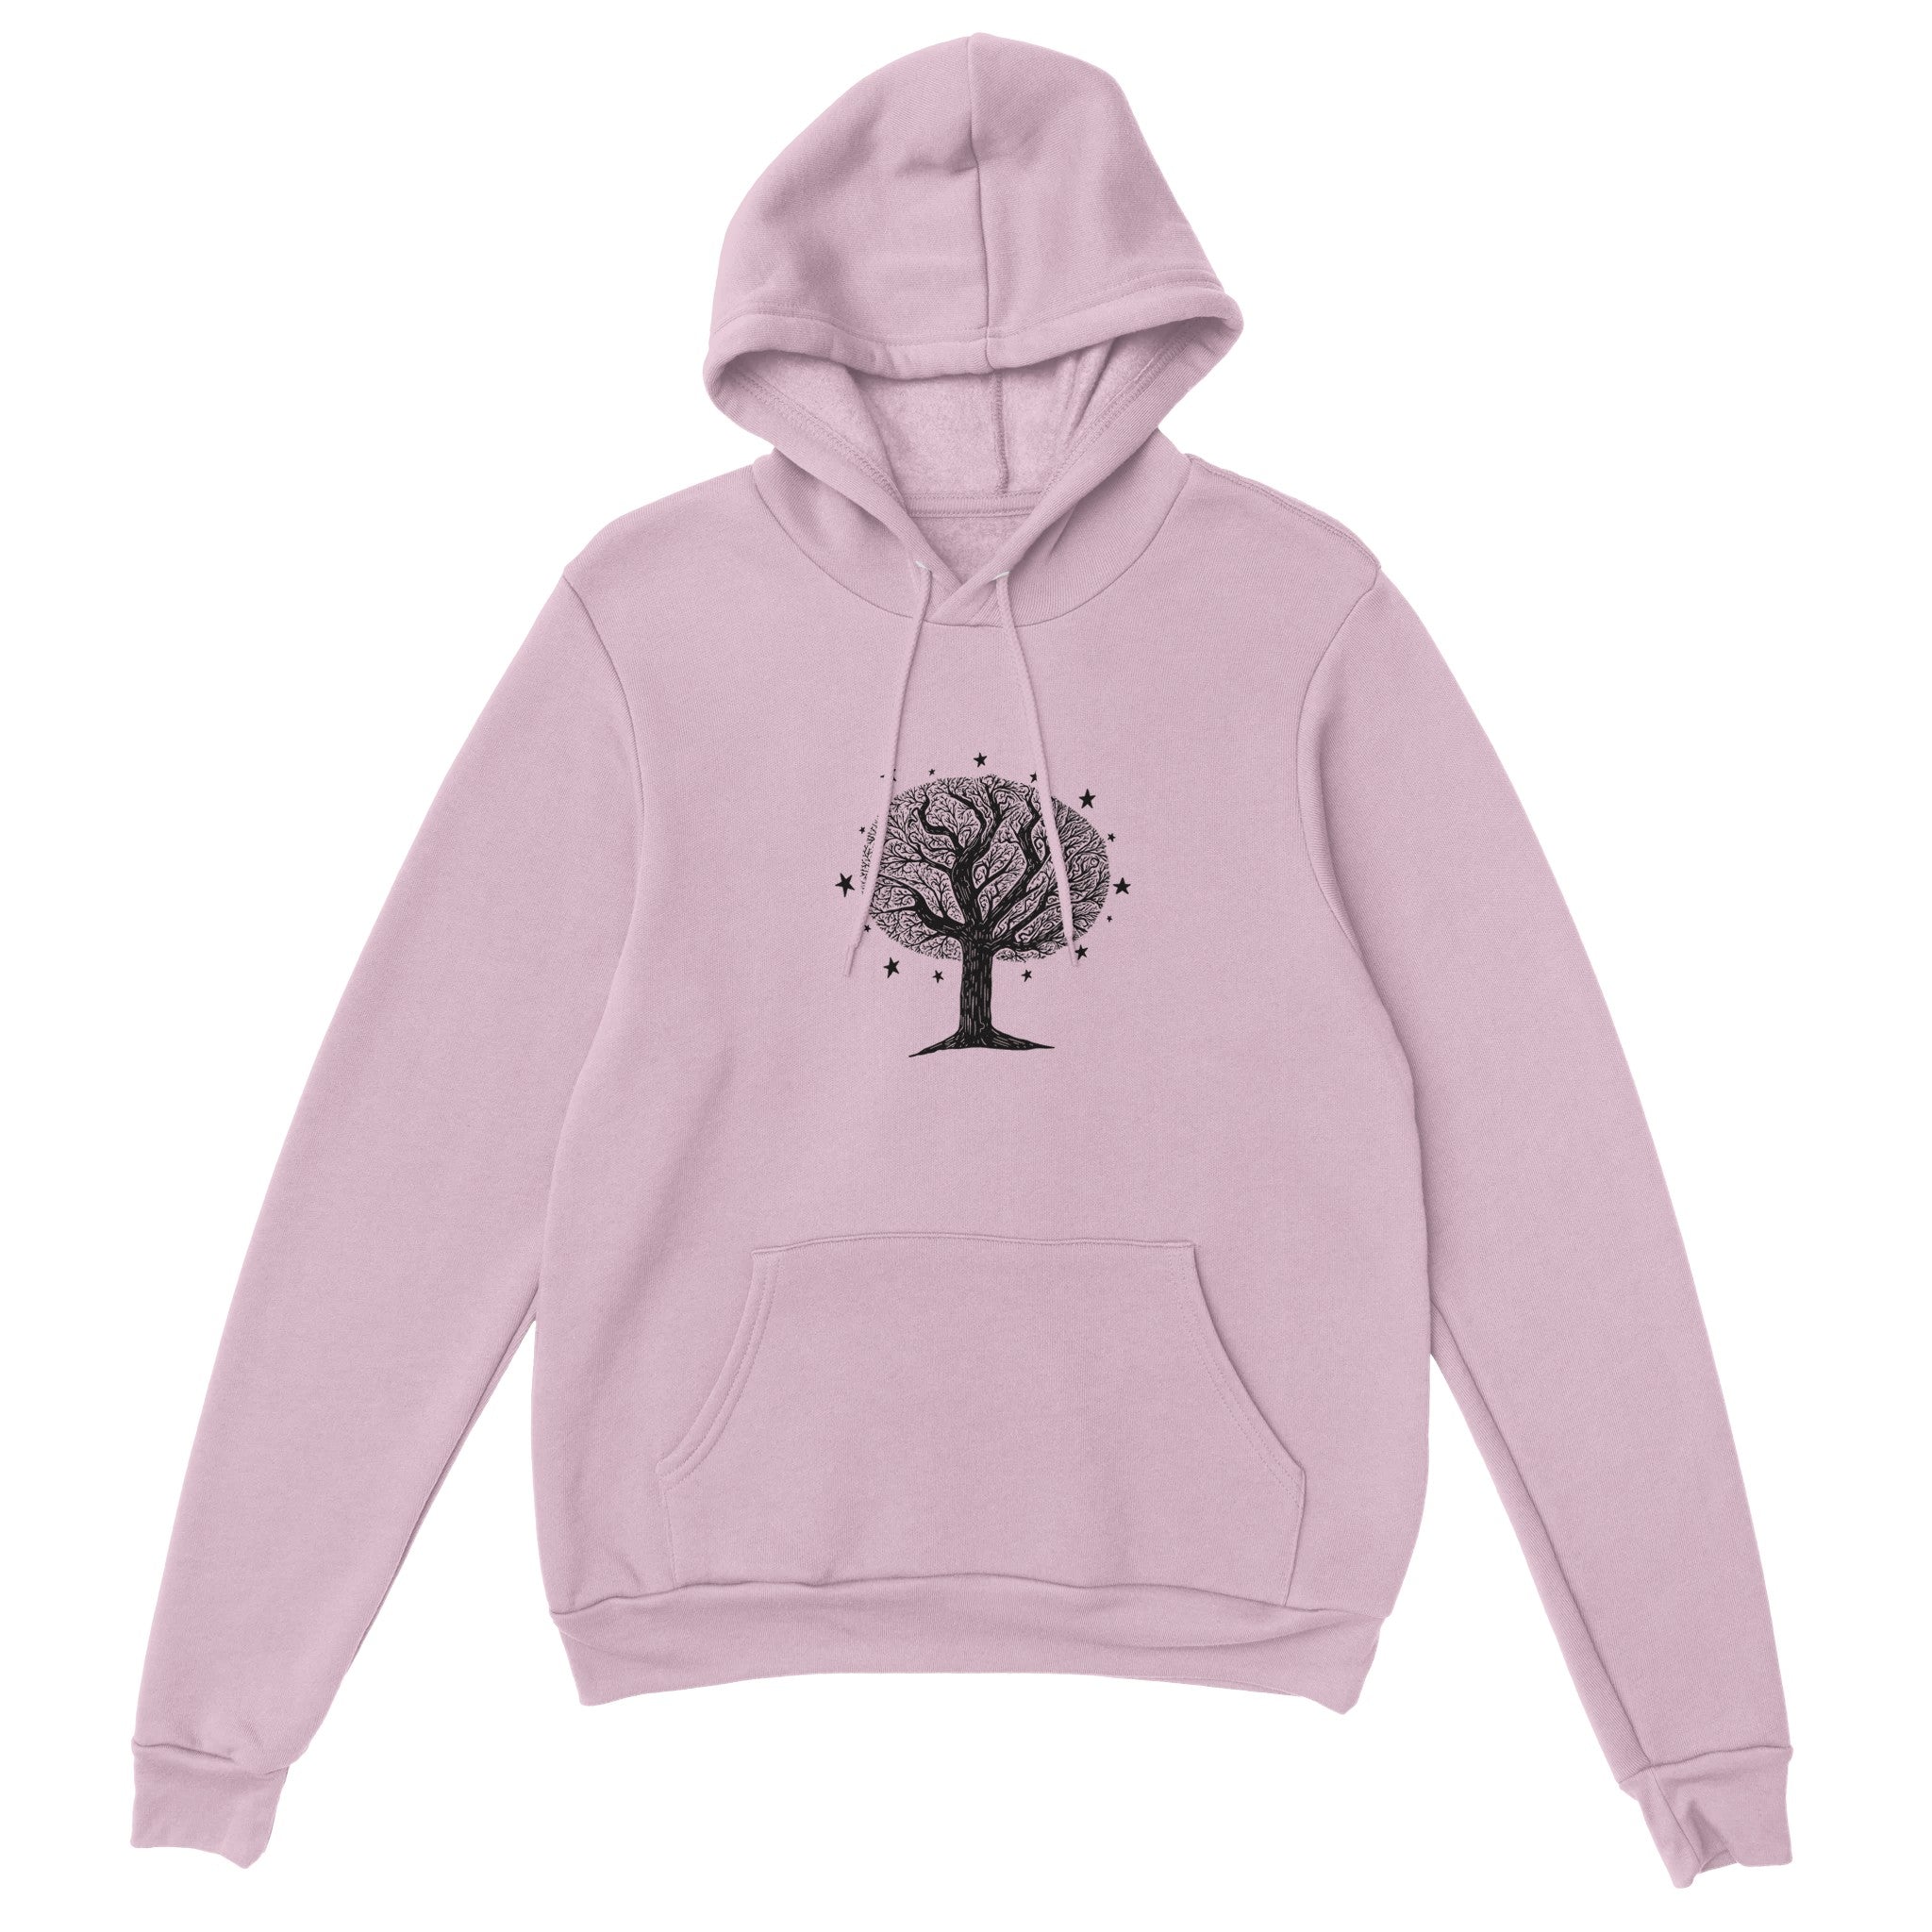 THE DREAMING TREE Pullover Hoodie